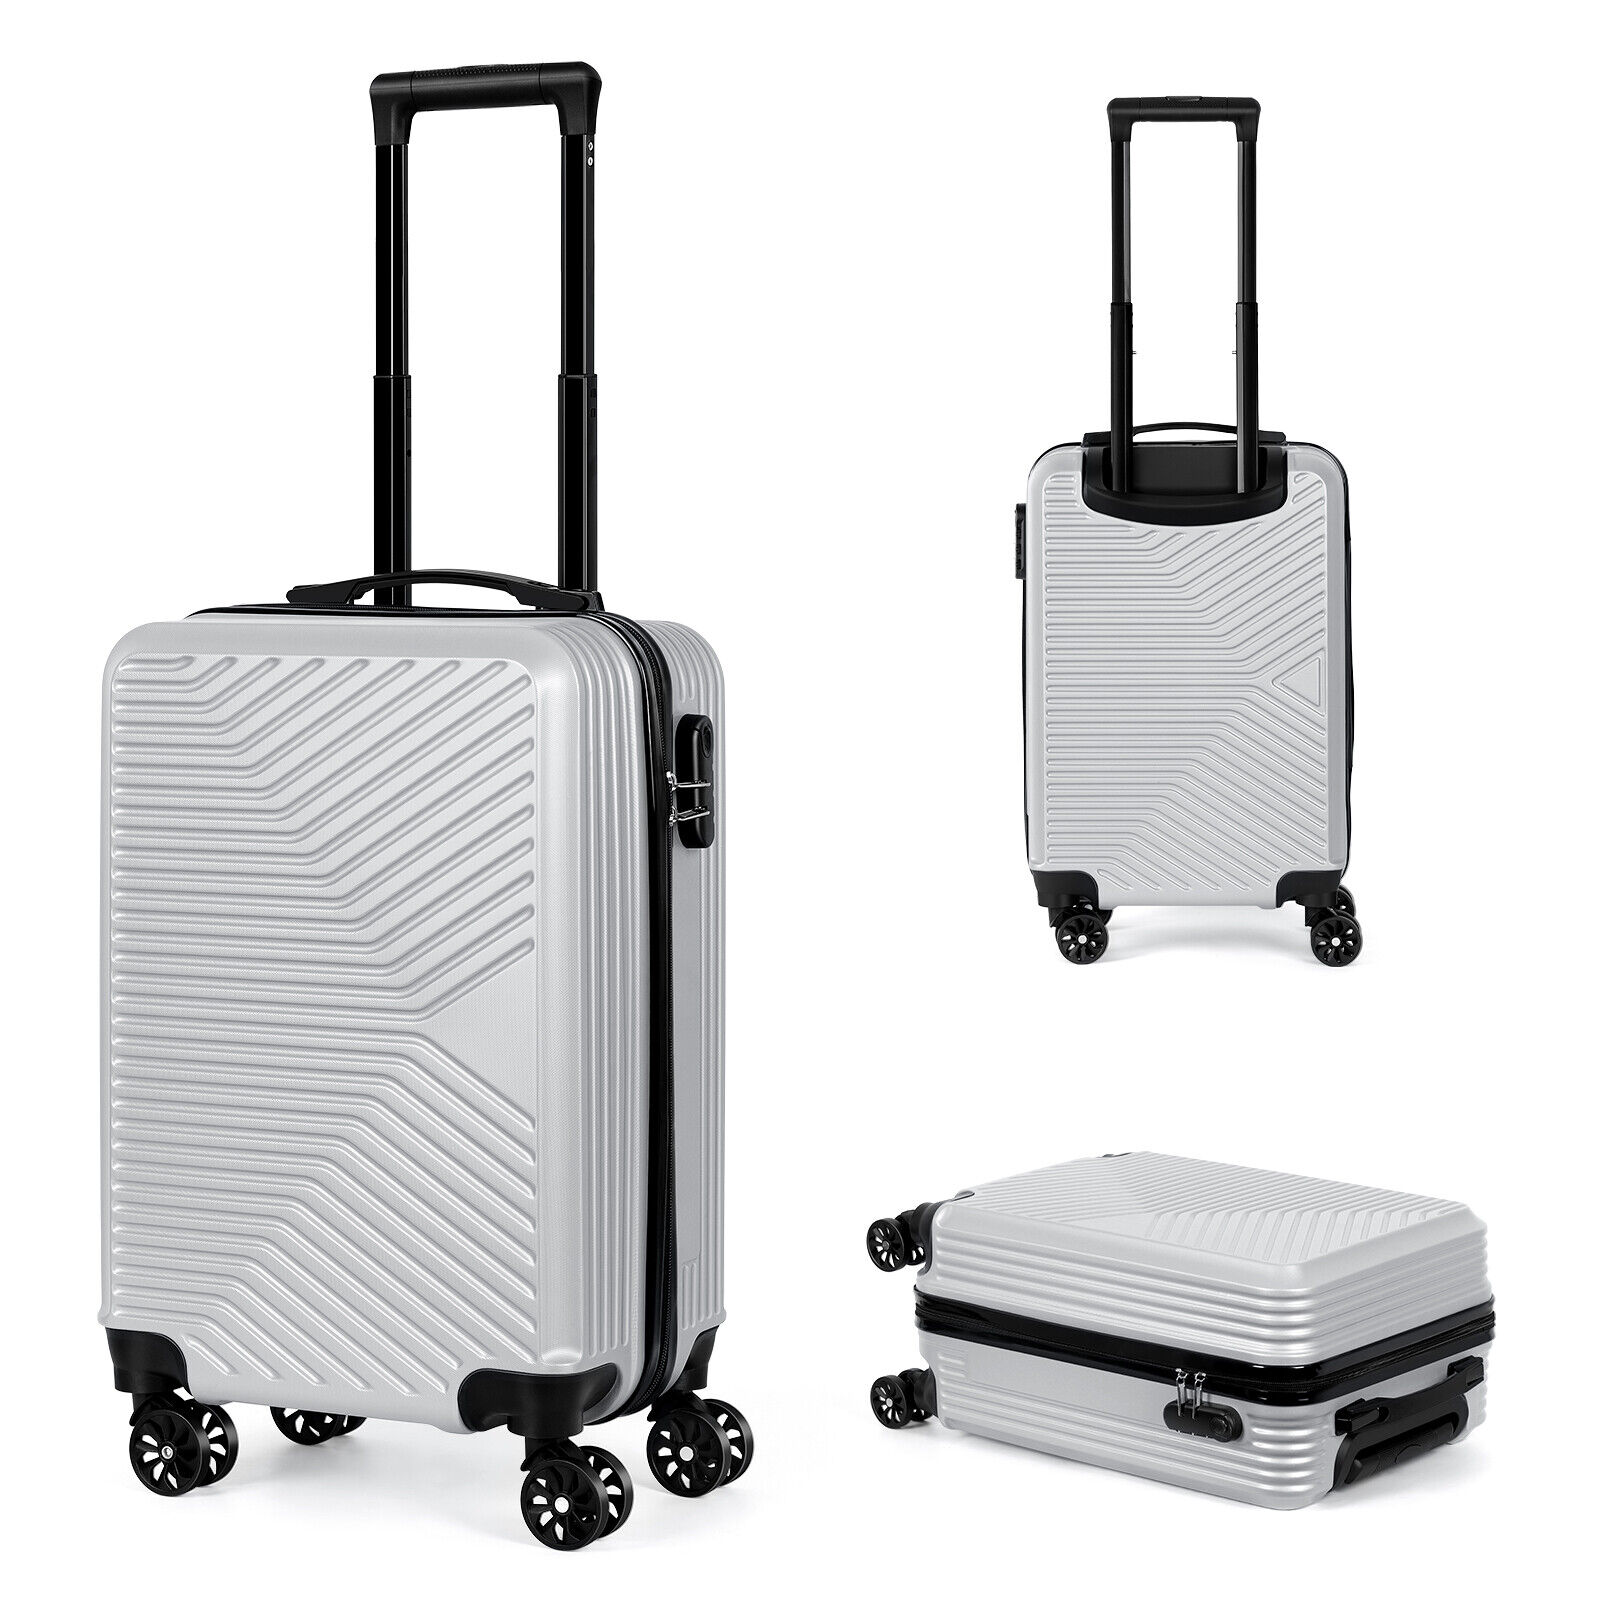 20 Inch Carry On Luggage Airline Approved Hard Shell Travel Suitcase with Wheels